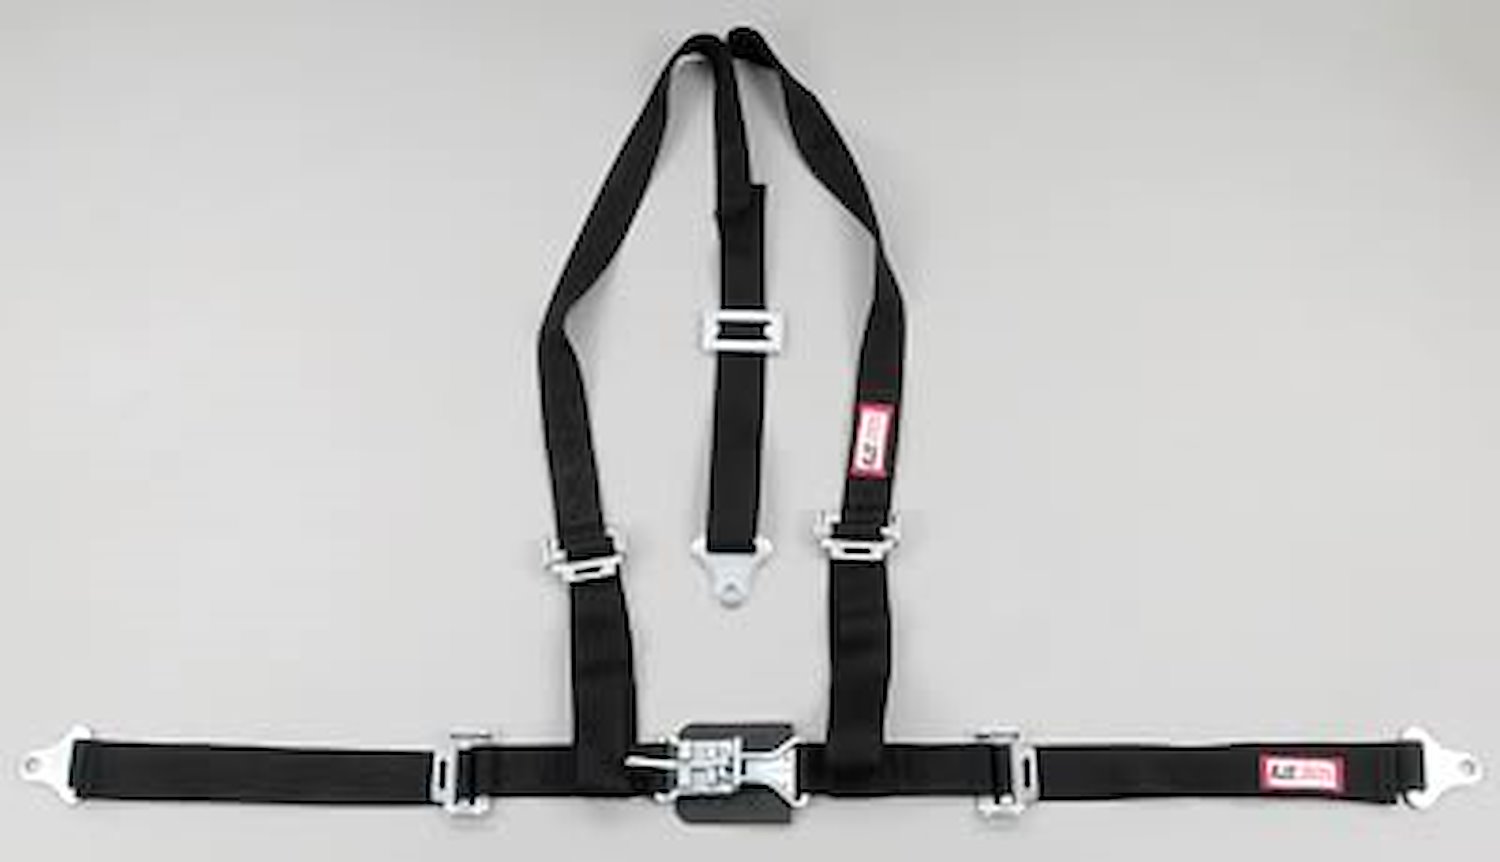 NON-SFI L&L HARNESS 3 PULL UP Lap Belt SEWN IN 2 S.H. Individual ROLL BAR Mount w/STERNUM STRAP ALL WRAP ENDS PURPLE